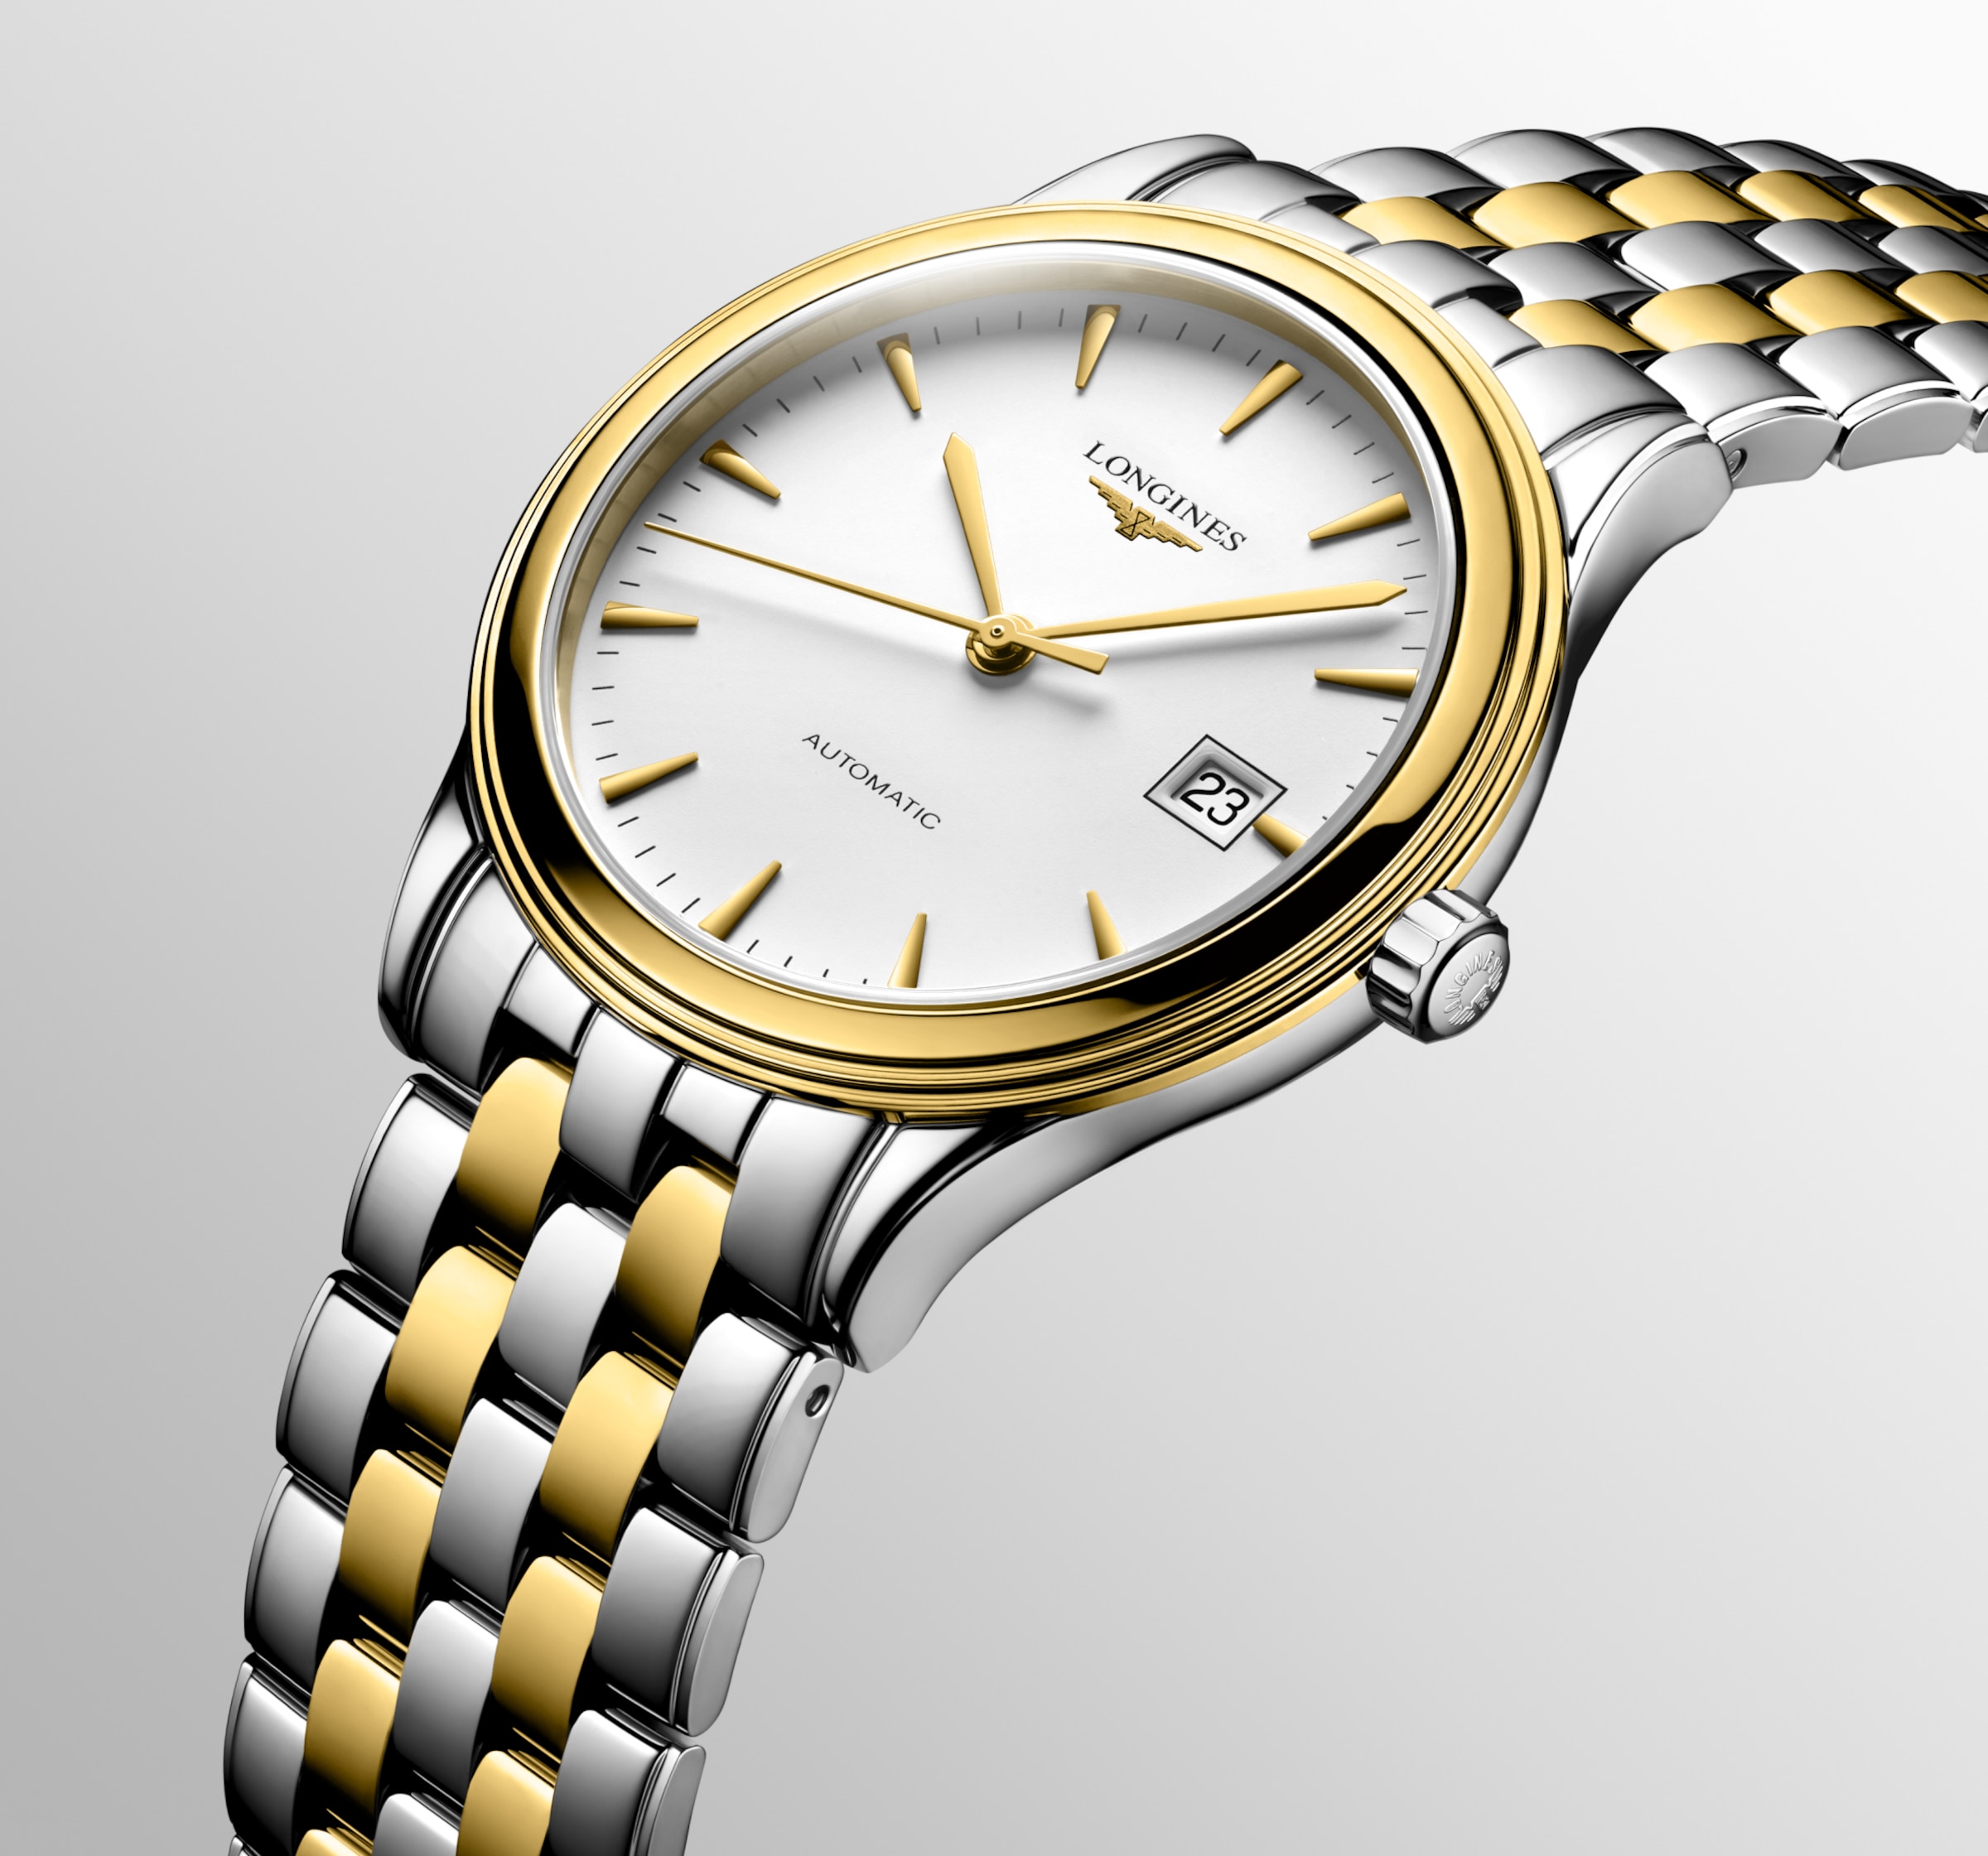 Longines FLAGSHIP Automatic Stainless steel and yellow PVD coating Watch - L4.974.3.22.7